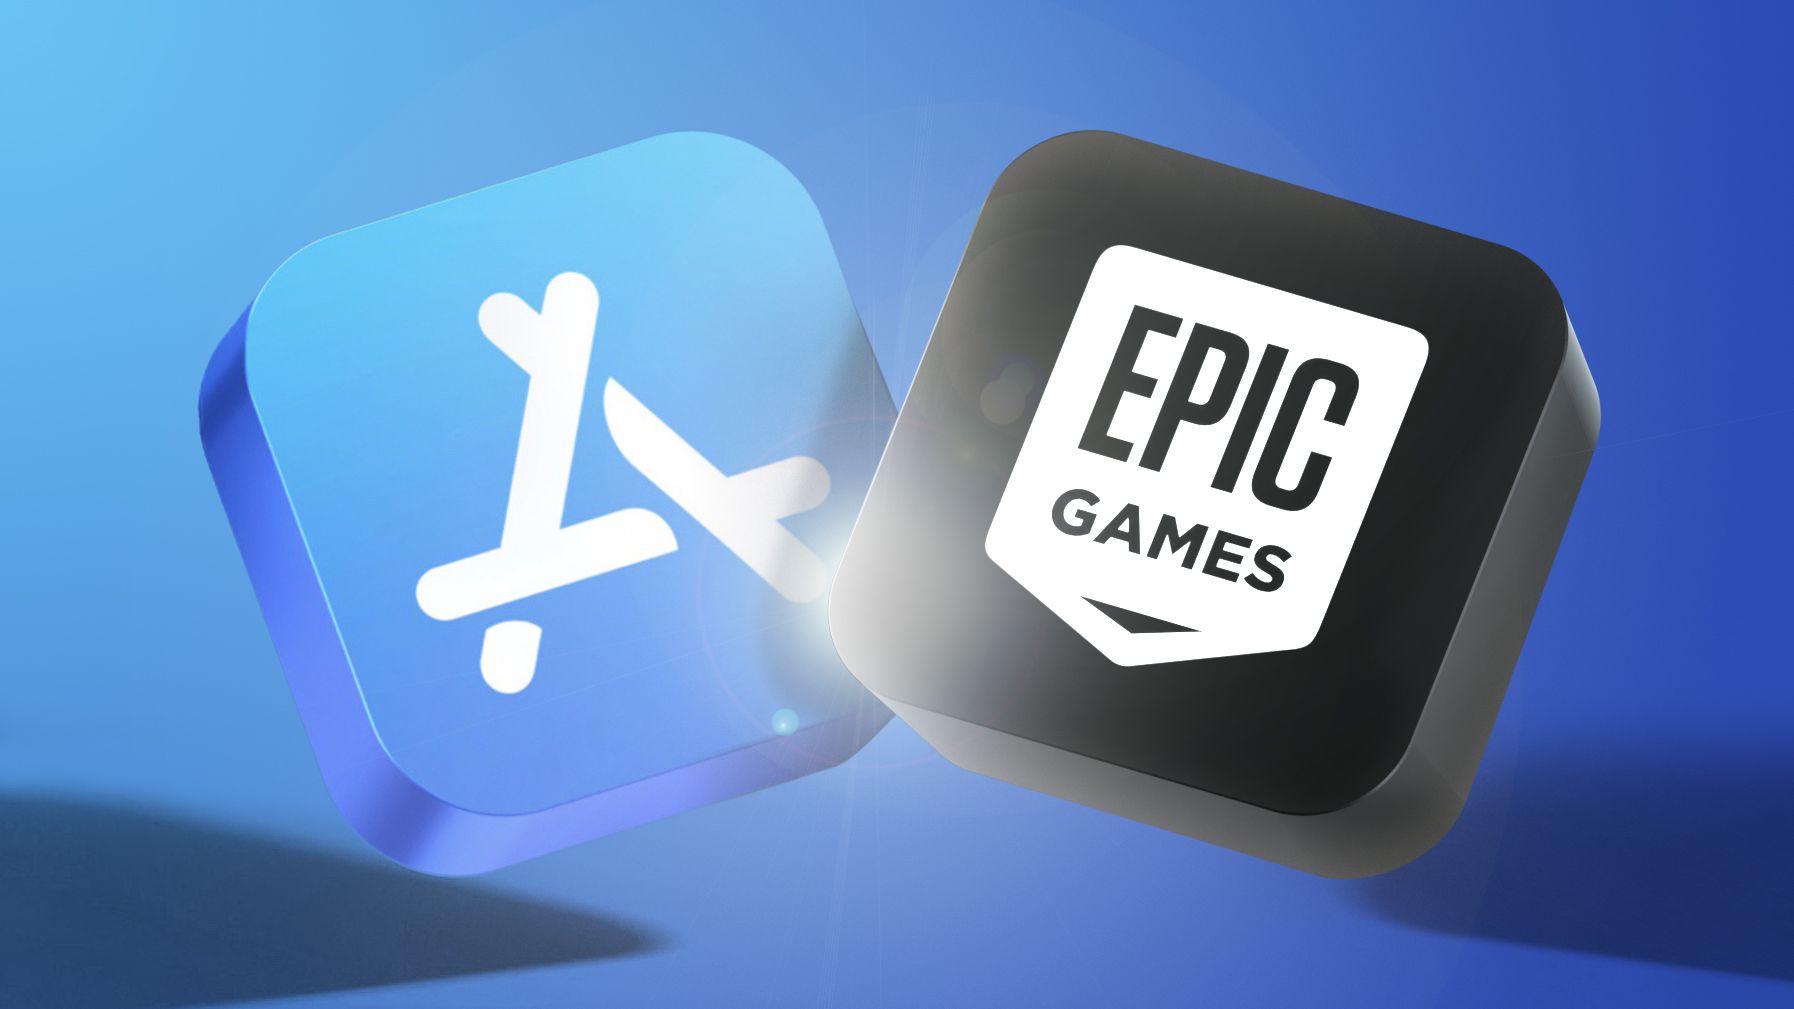 Epic Games Not Satisfied With Ruling in Case Against Apple, Files Appeal -  MacRumors